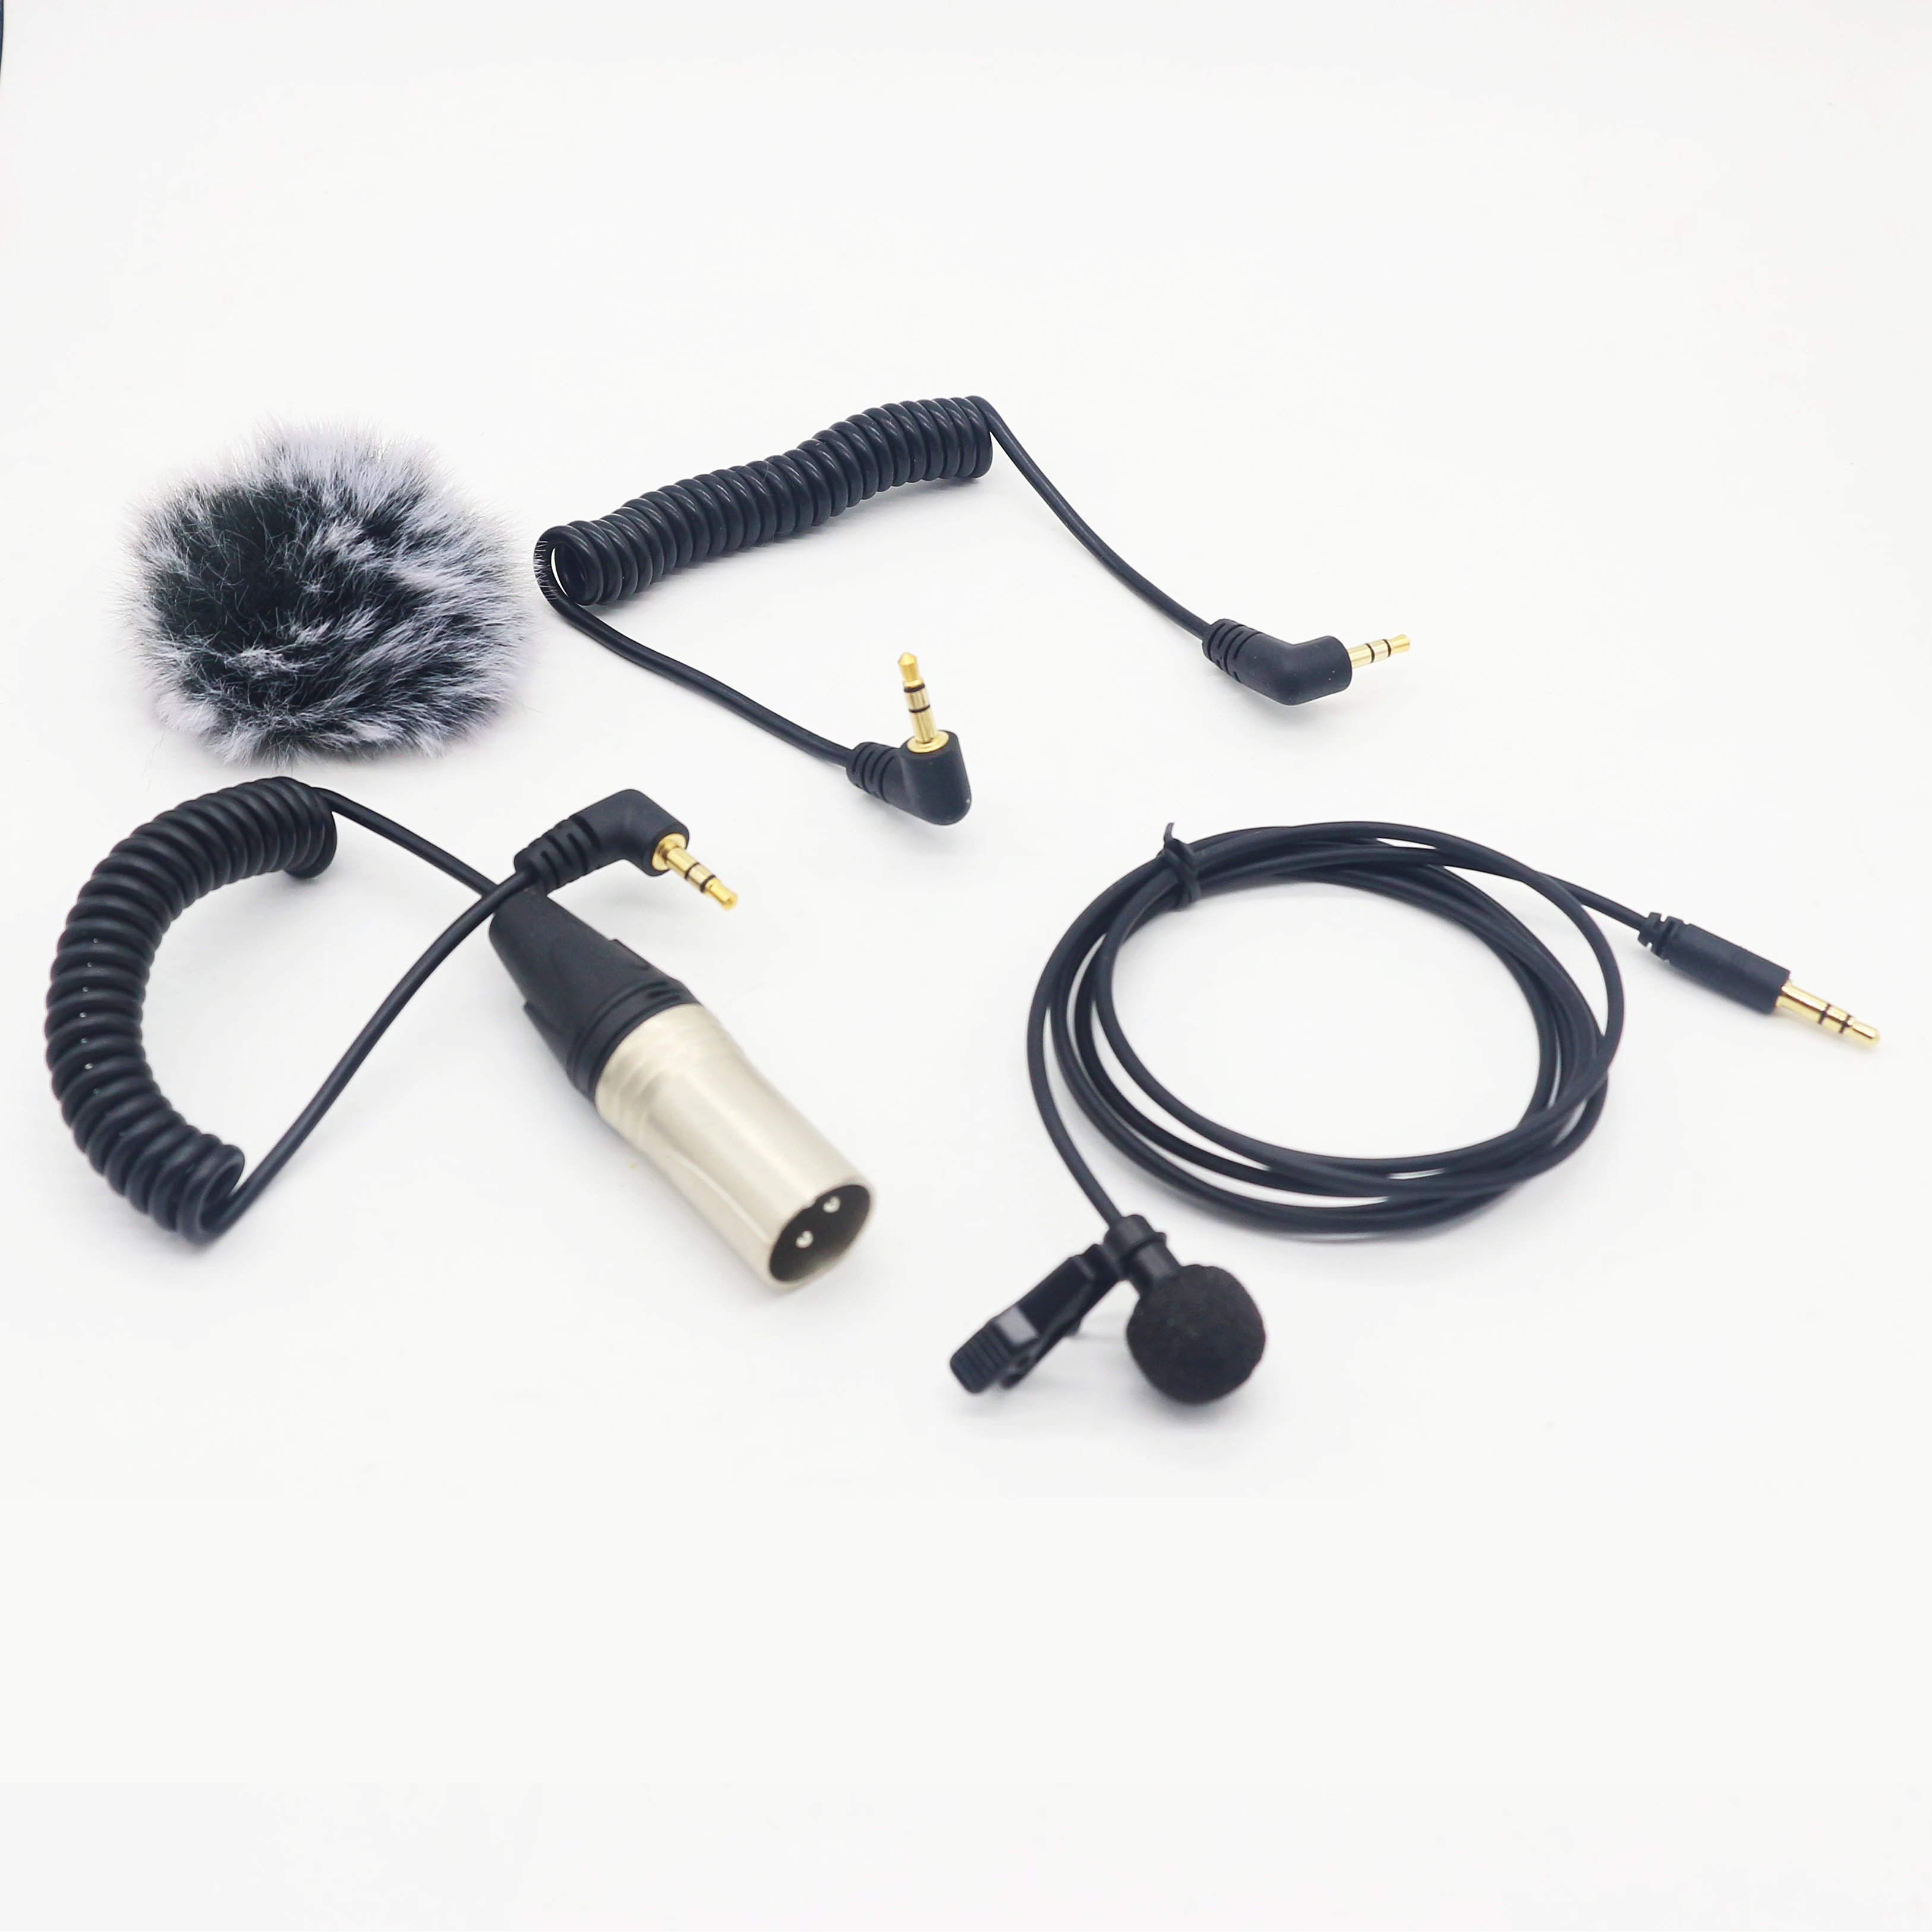 

mic studio karaoke interview sound recording transmitter for DJI Mic Lavalier Microphone accessories 3.5mm cable CANNON cable